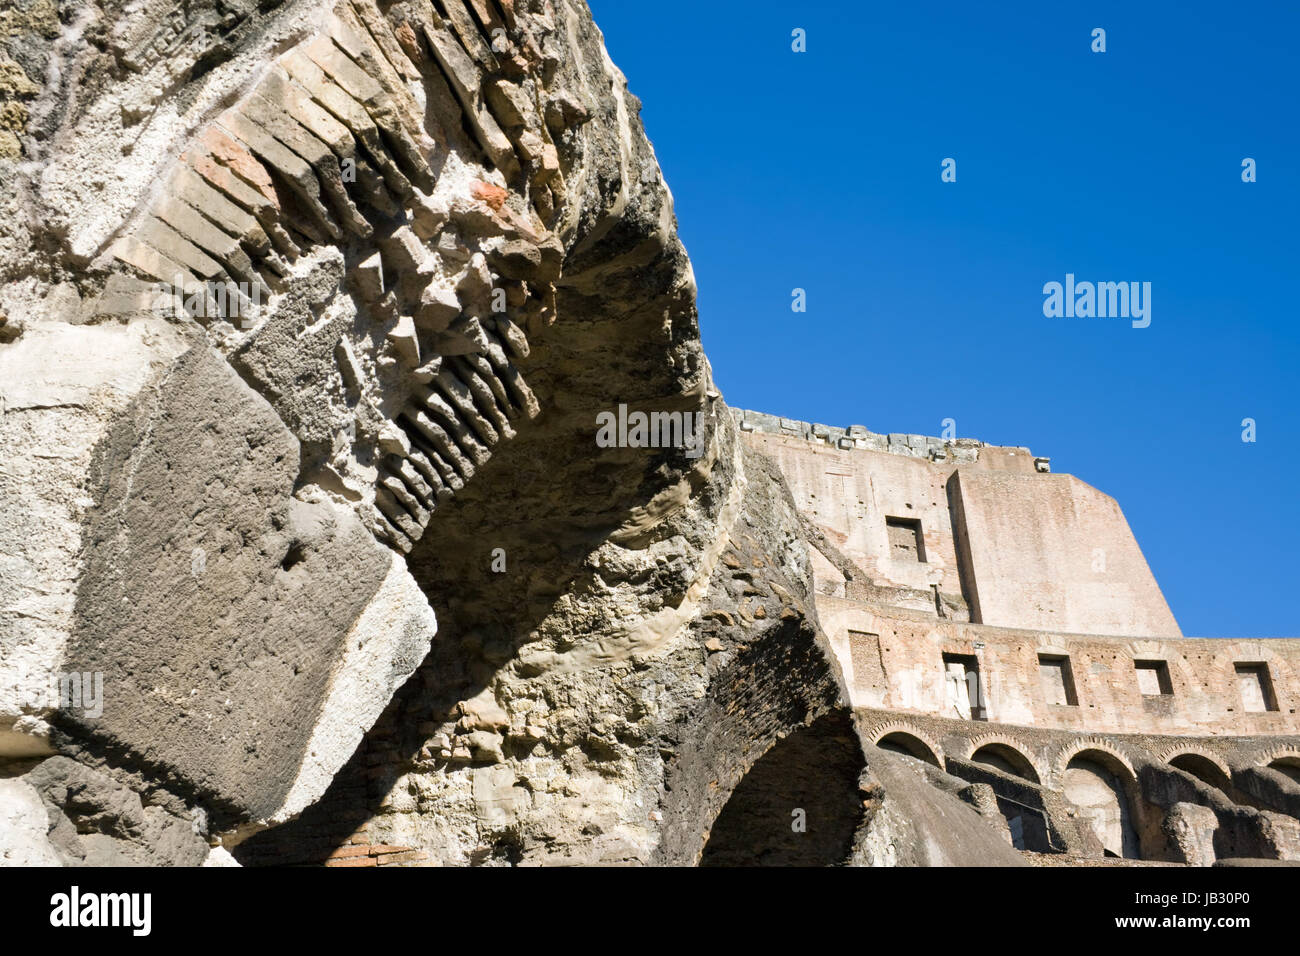 Ancient roman amphitheater Colosseum in Rome, Italy Stock Photo